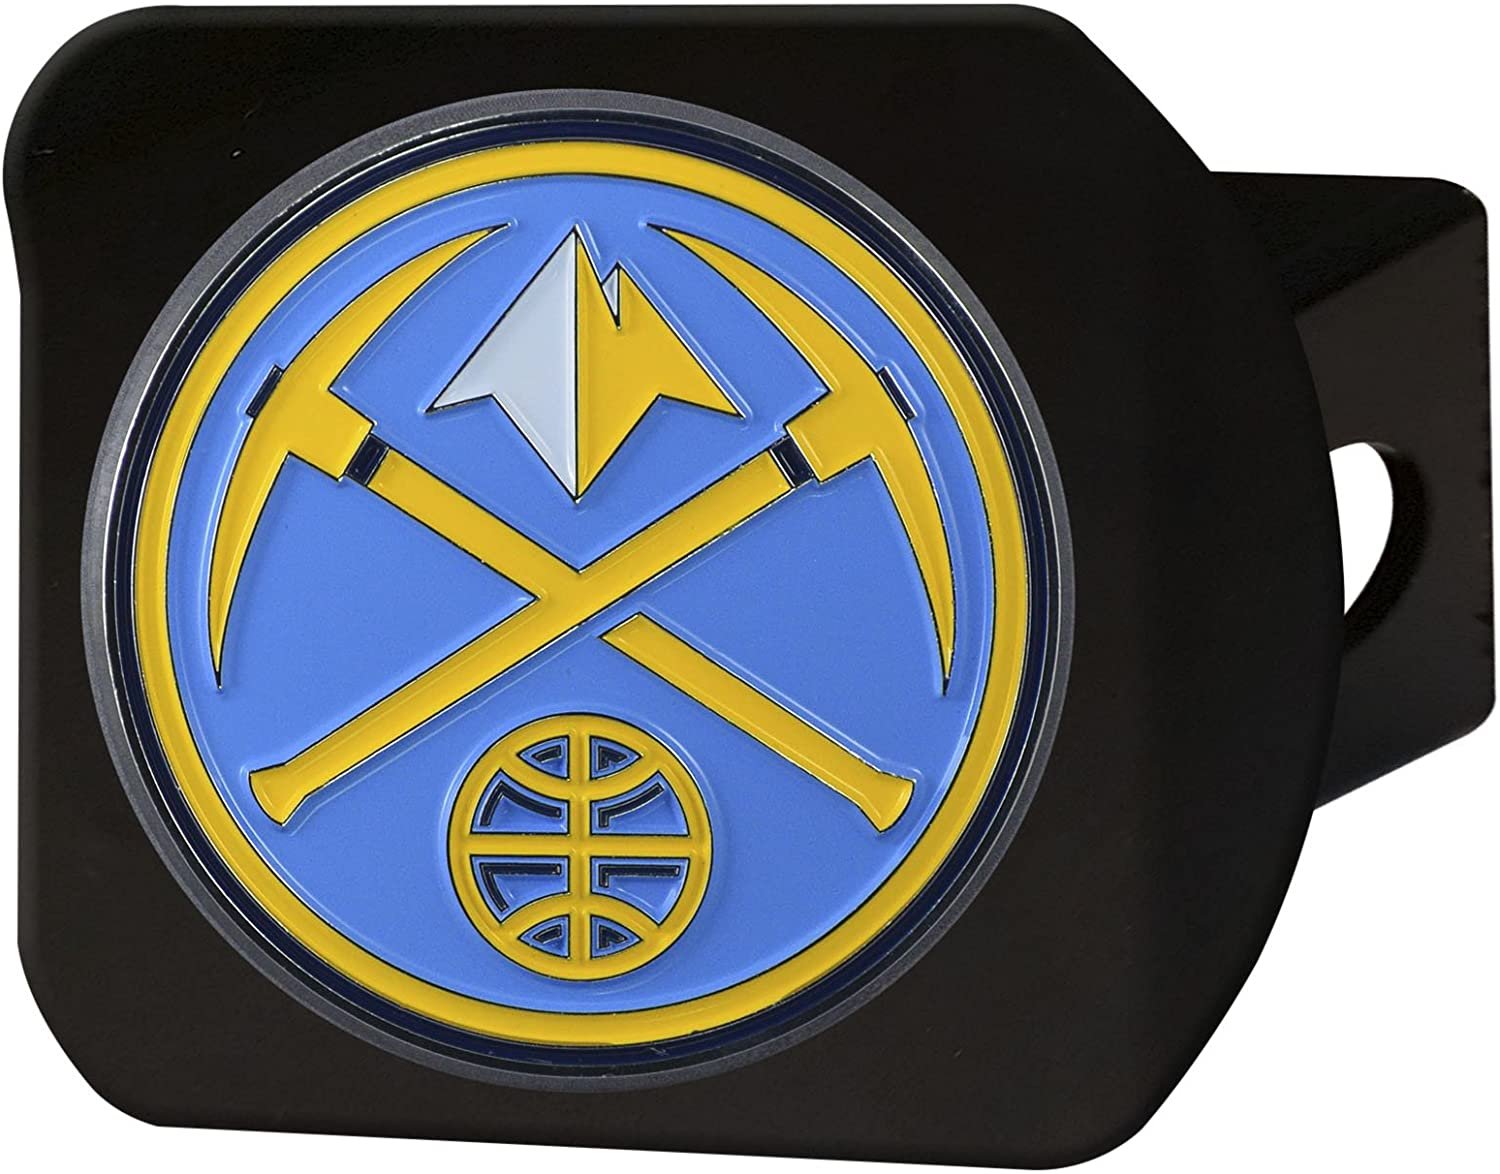 Denver Nuggets Solid Metal Black Hitch Cover with Color Metal Emblem 2 Inch Square Type III